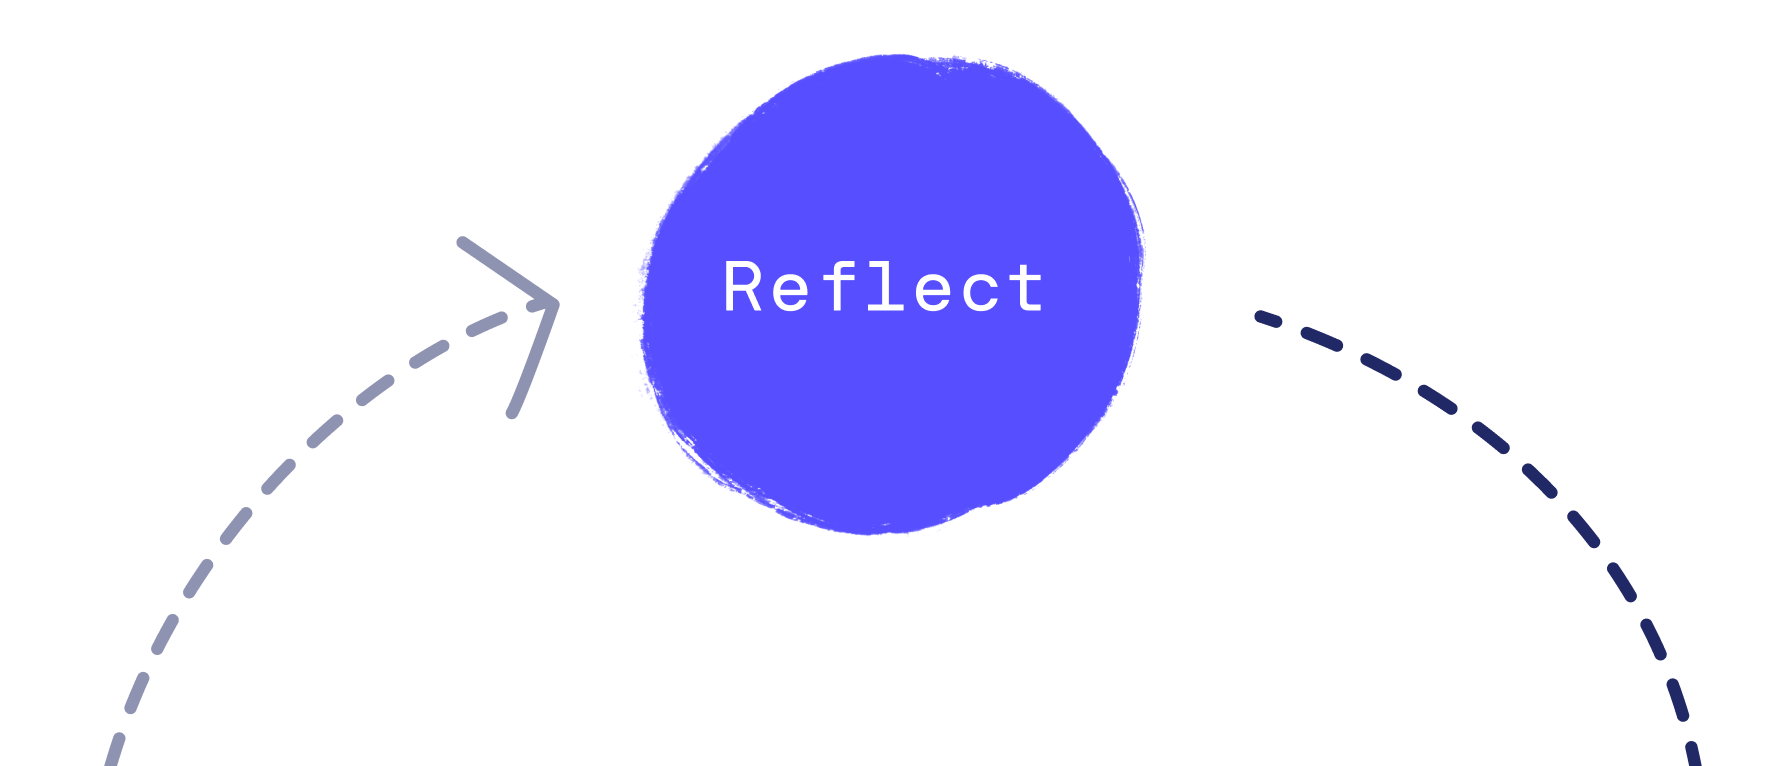 Reflect in blue-purple circle with circular arrows